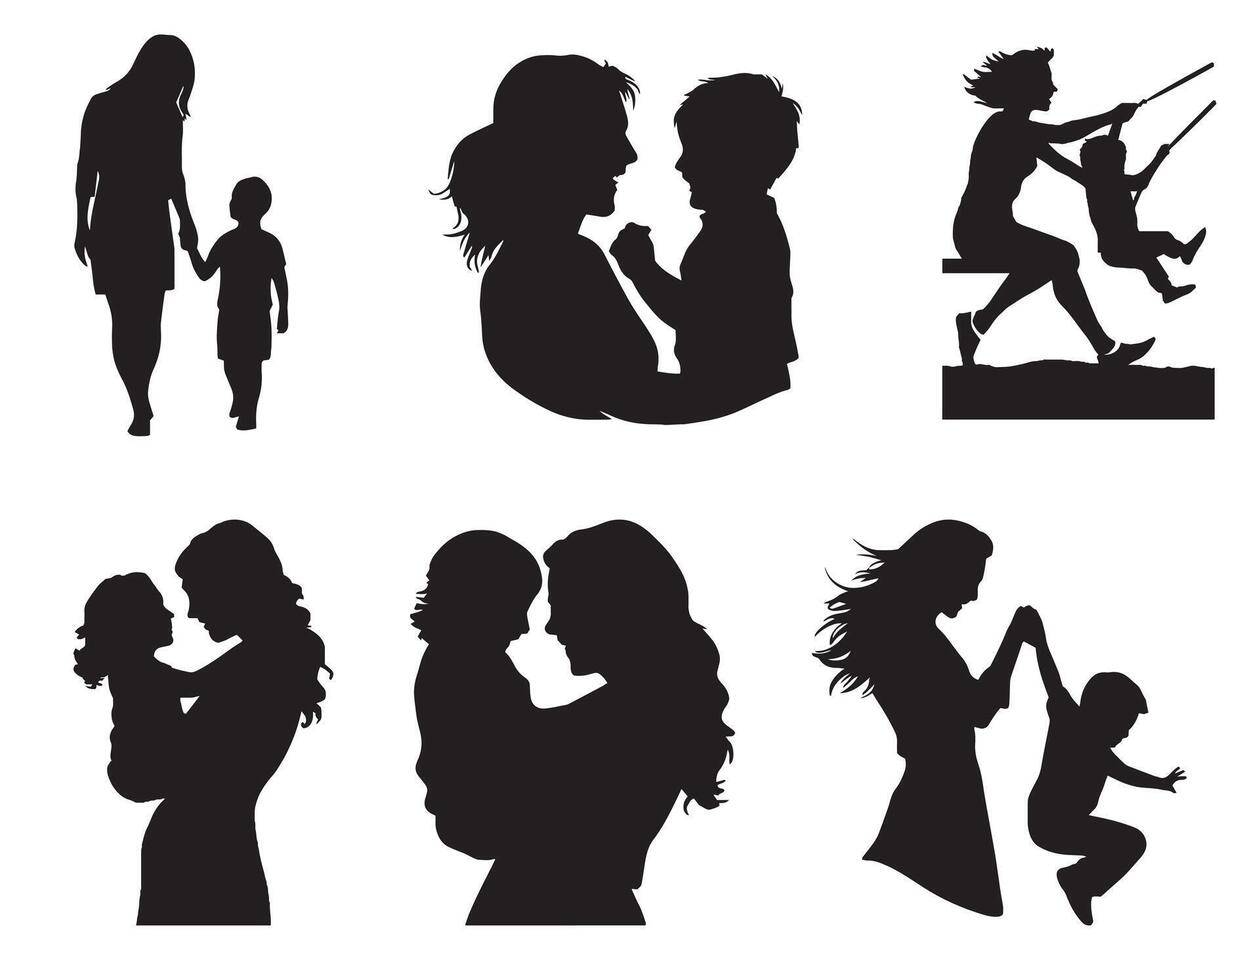 Mom and child Black Silhouettes illustration. Happy Mother's Day concept vector